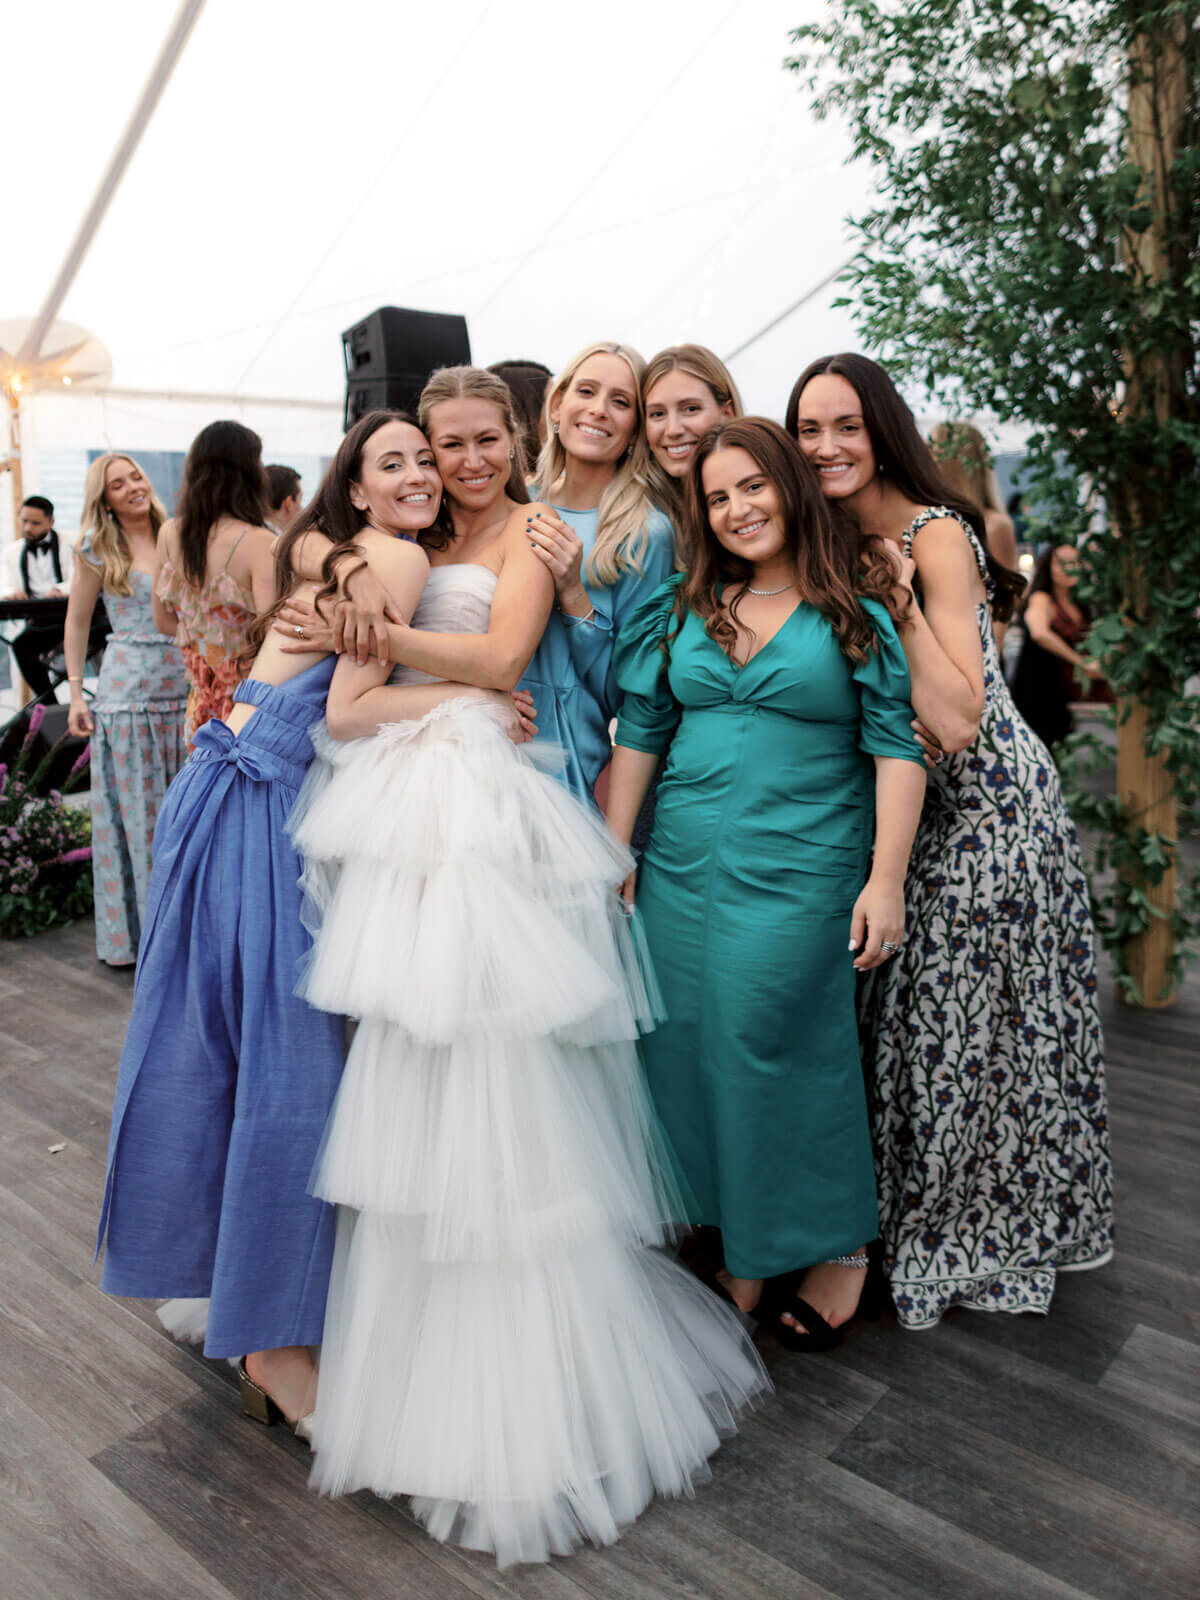 The bride is hugging a bridesmaid, along with other bridesmaids at the wedding reception at The Ausable Club, NY. Image by Jenny Fu Studio